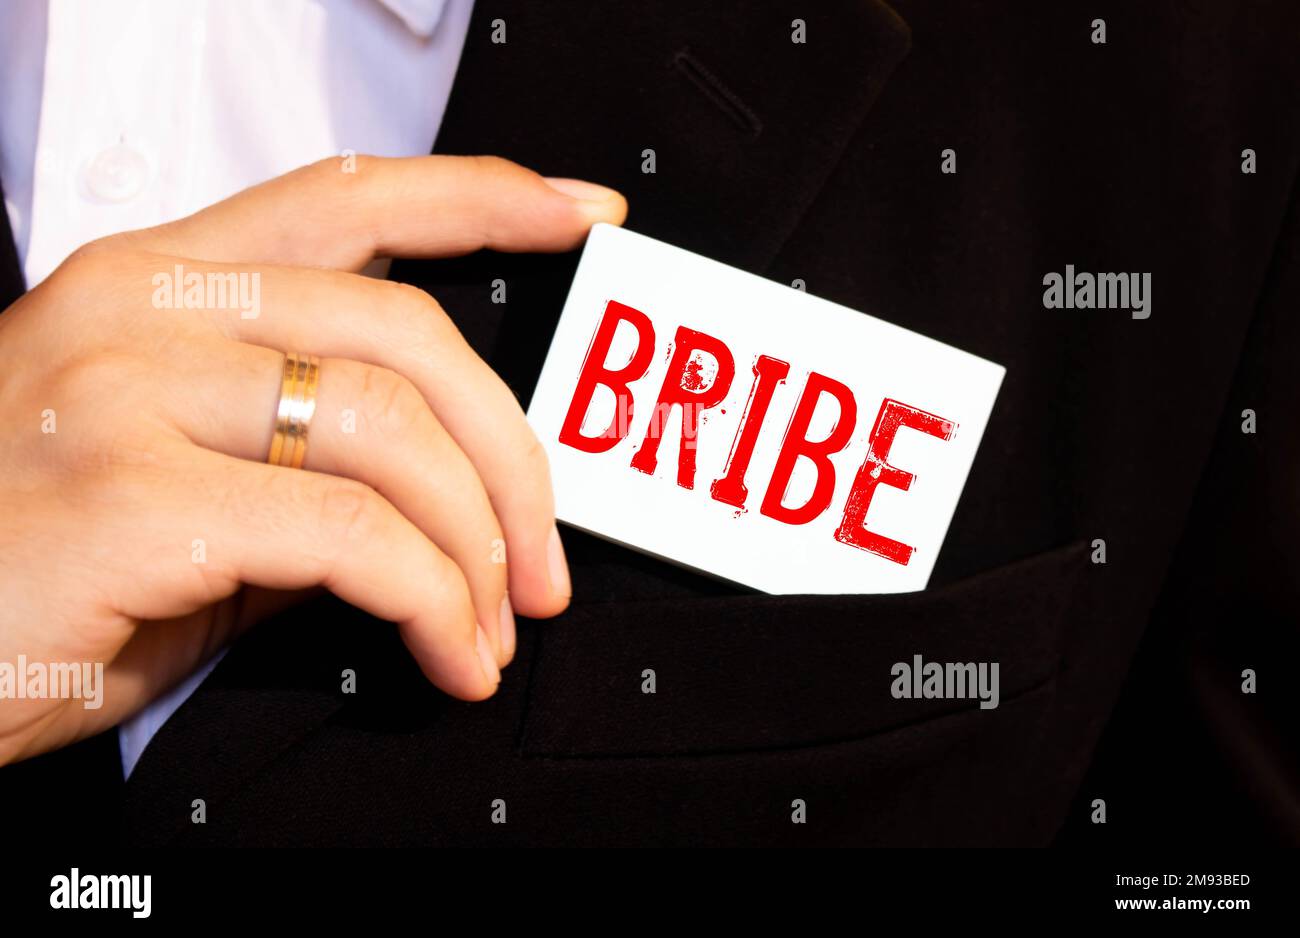 a person puts in his pocket a card labeled BRIBE Stock Photo